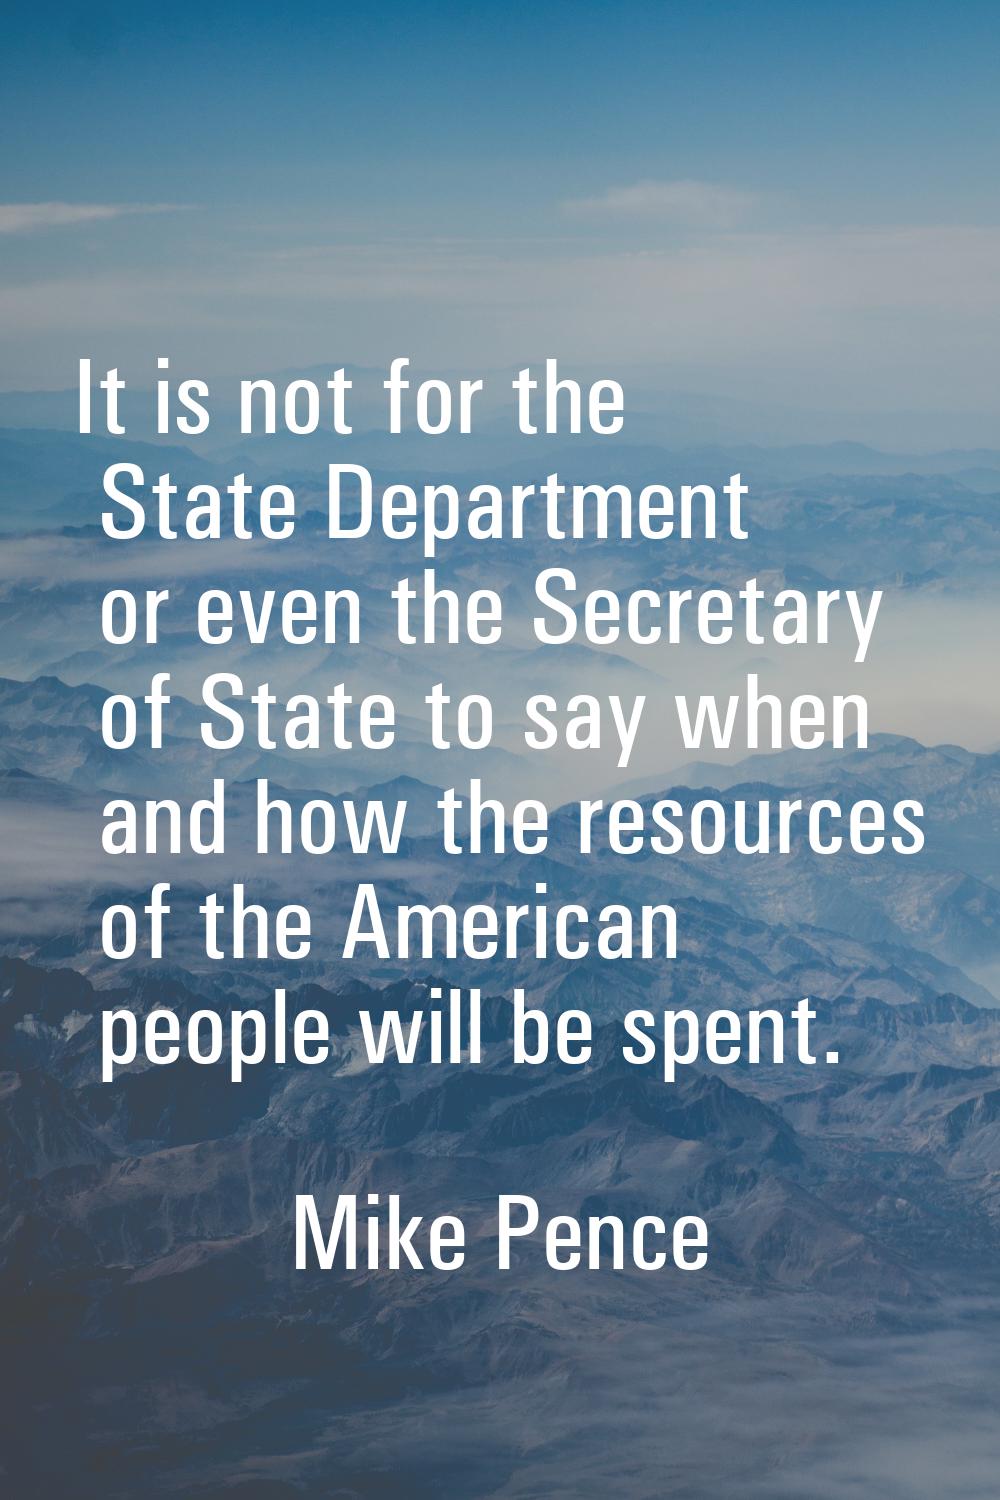 It is not for the State Department or even the Secretary of State to say when and how the resources